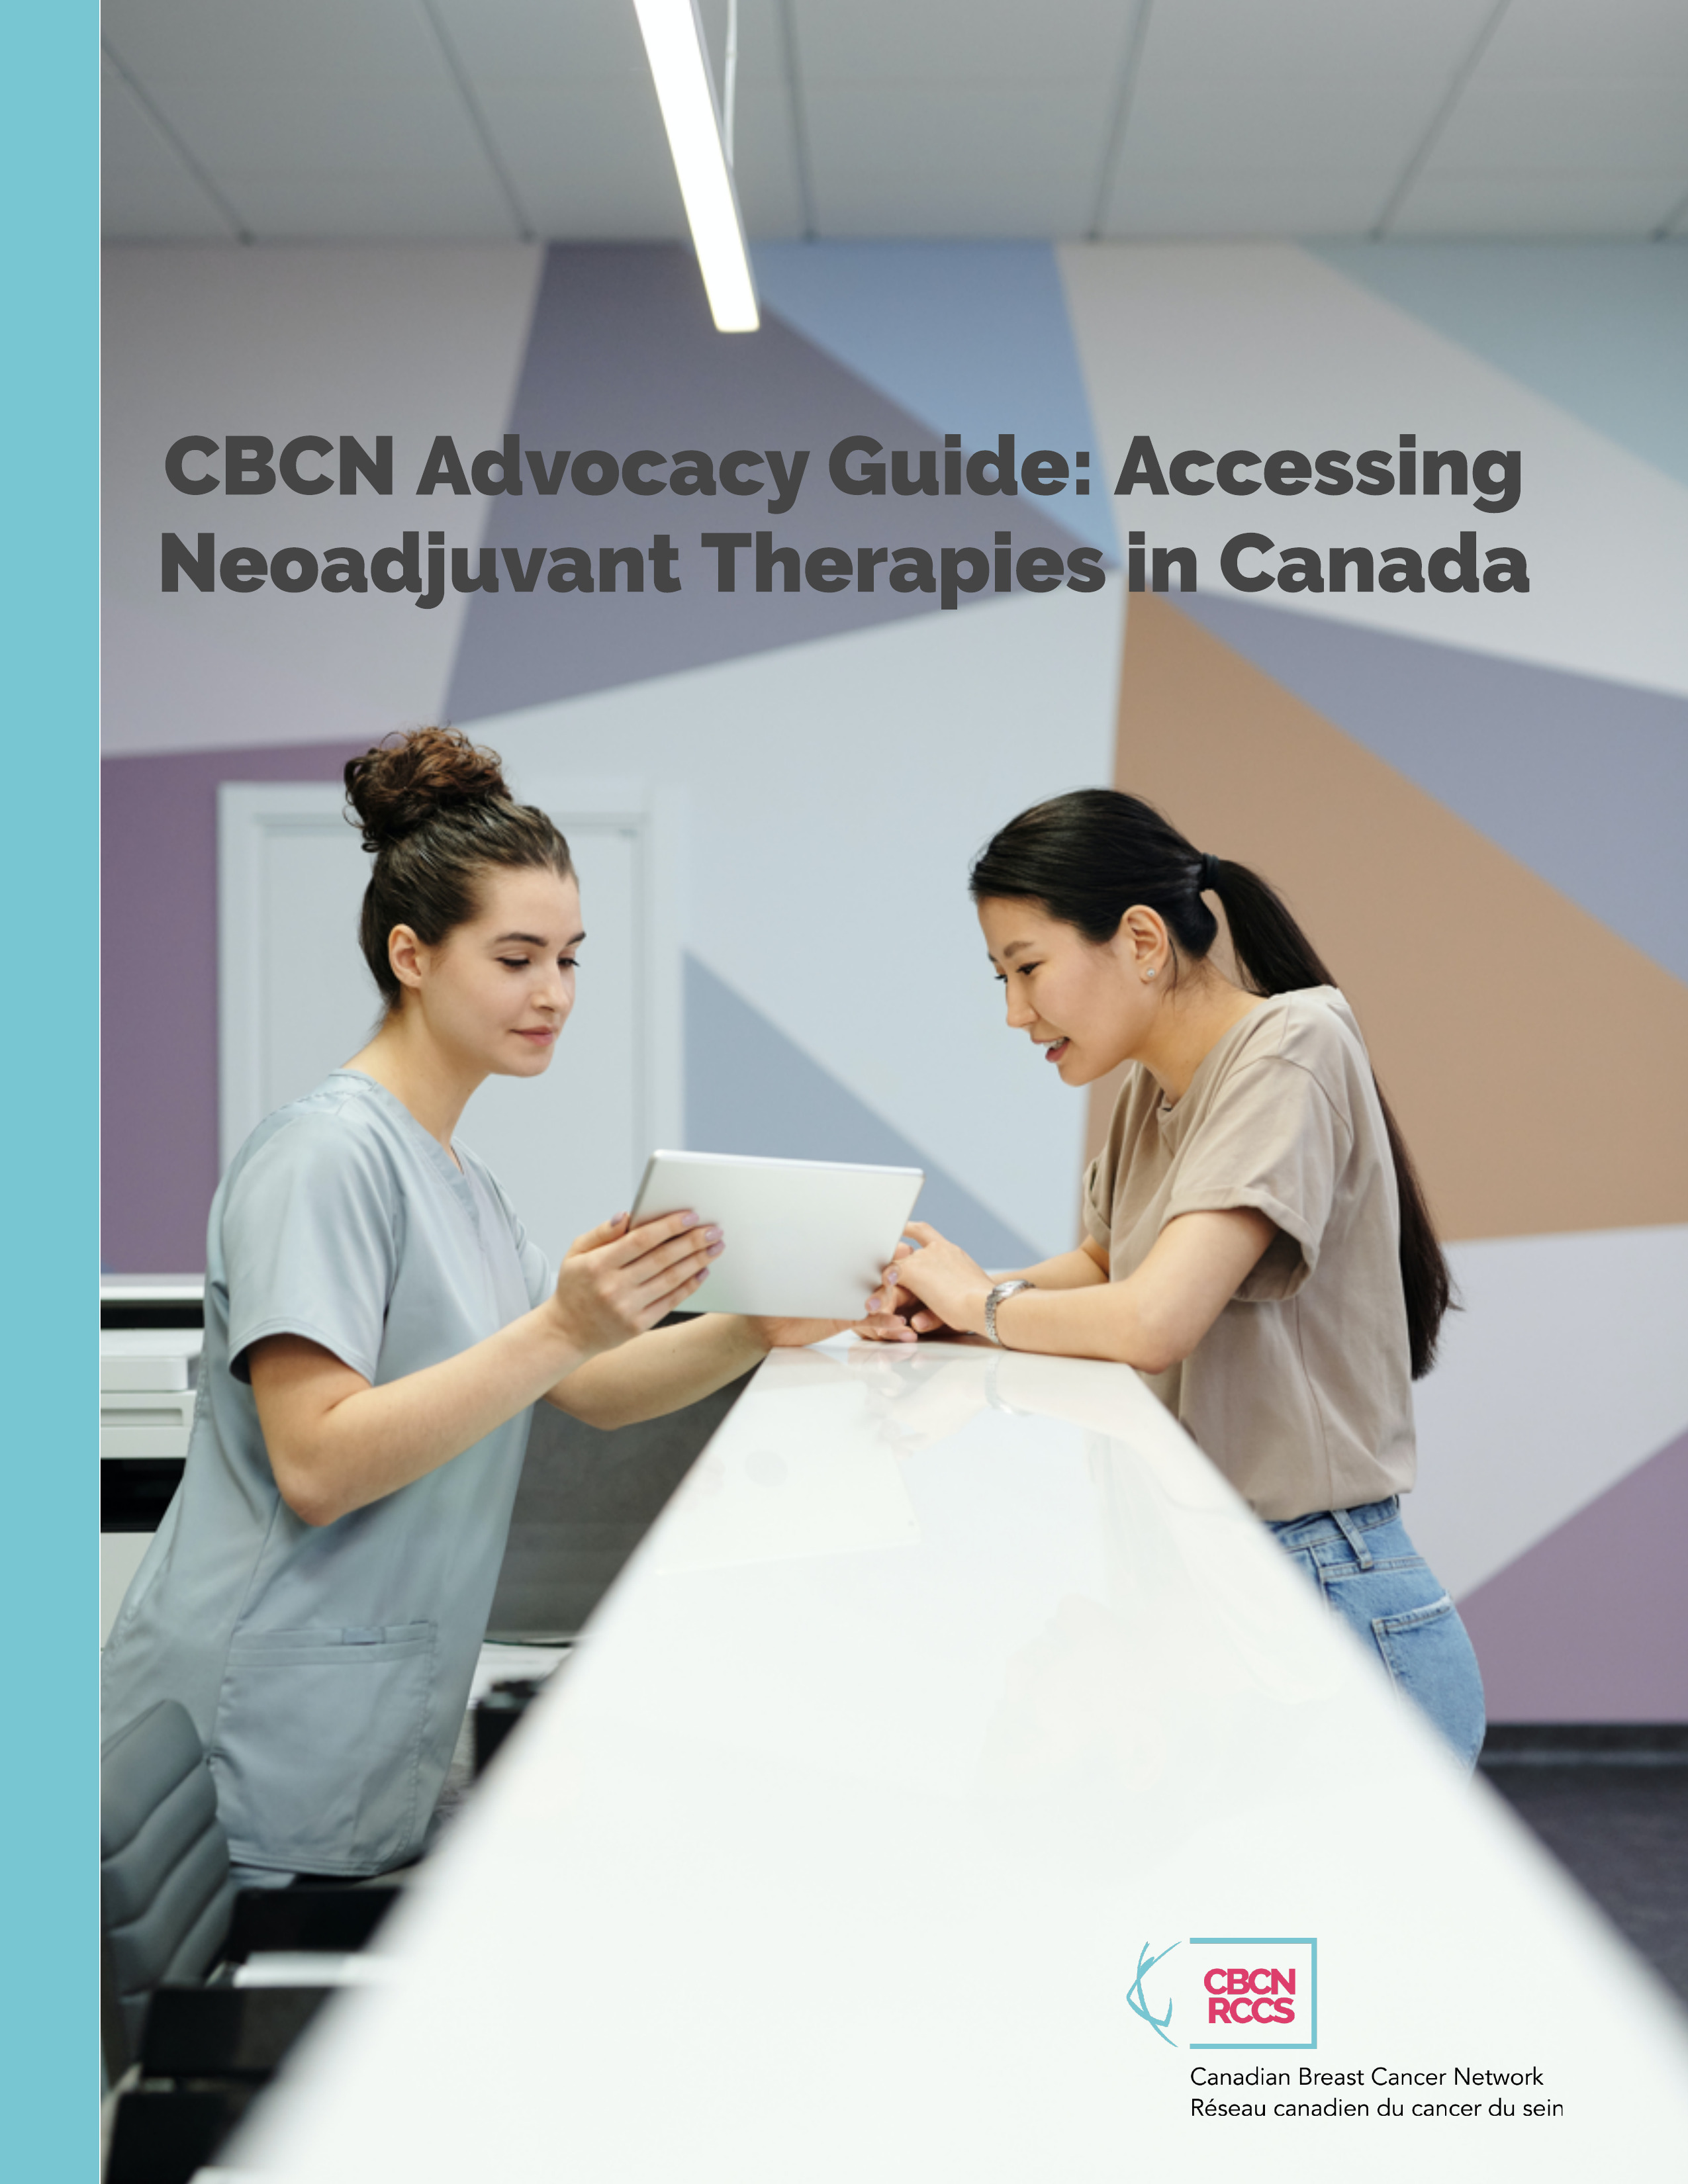 CBCN Advocacy Guide: Neoadjuvent Therapies